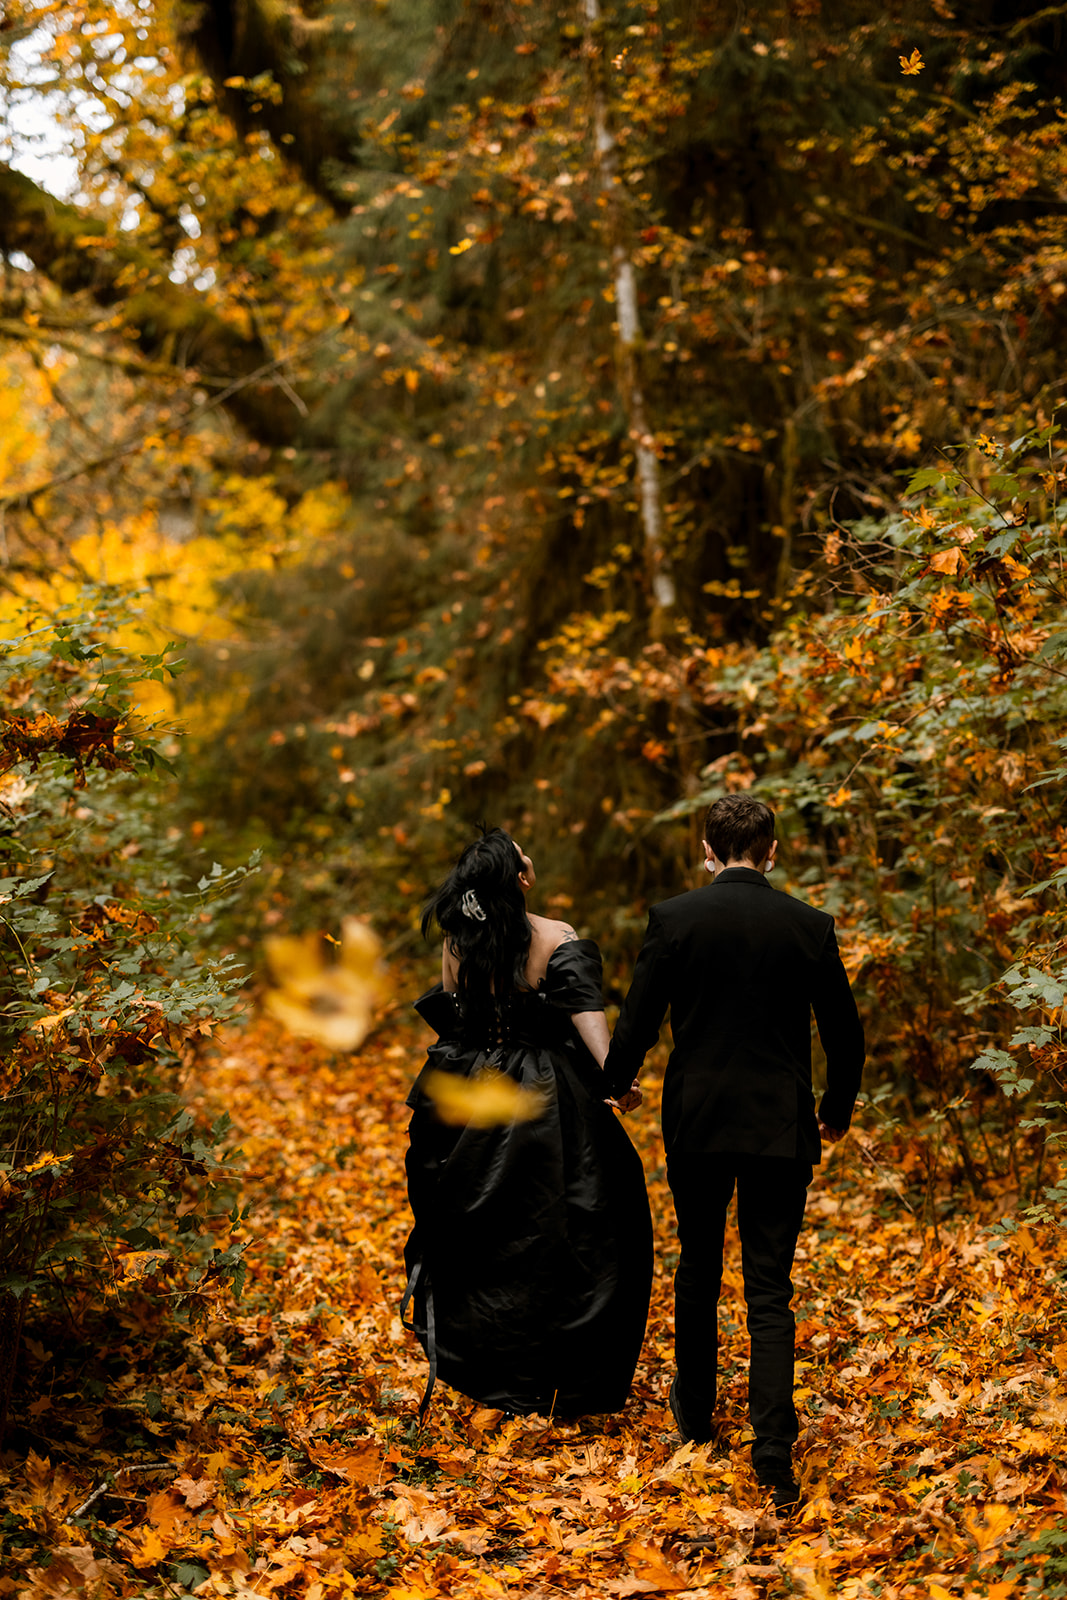 A couple in black elopement outfits walk hand in hand away from the camera, as orange leaves fall and cover the ground.